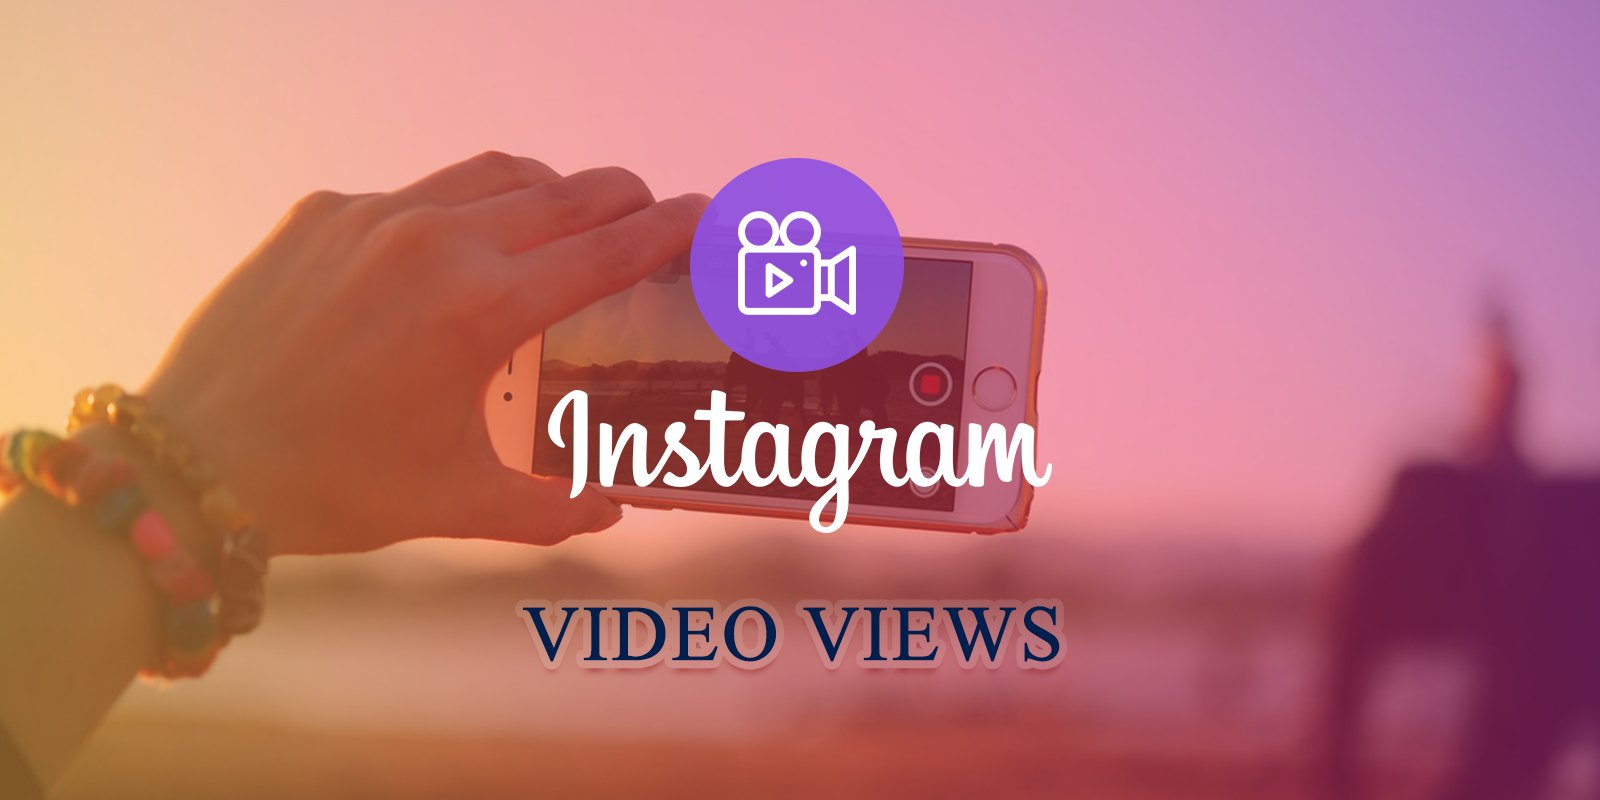 Top Tips About Buying Instagram Video Views You Need to Know